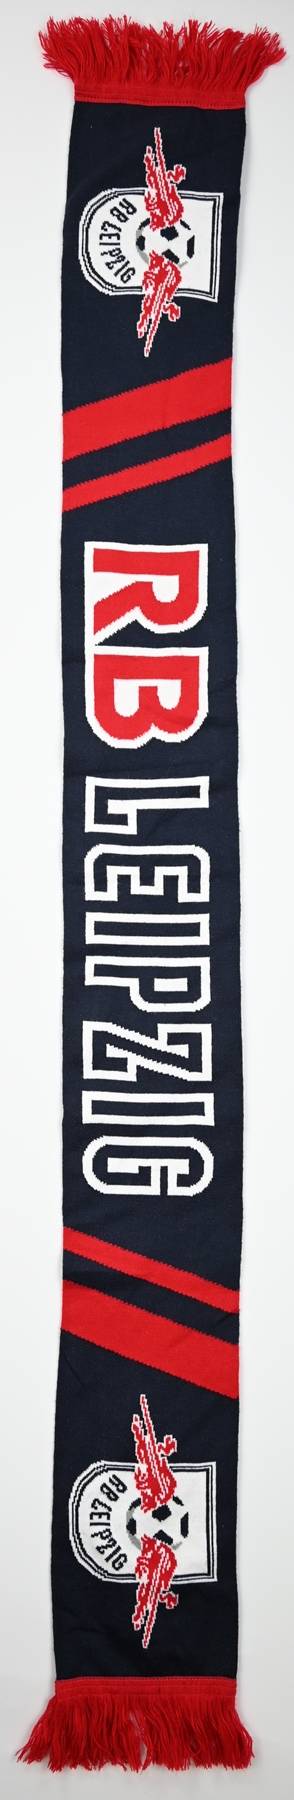 RB LEIPZIG SCARF Other \ Scarves | Classic-Shirts.com